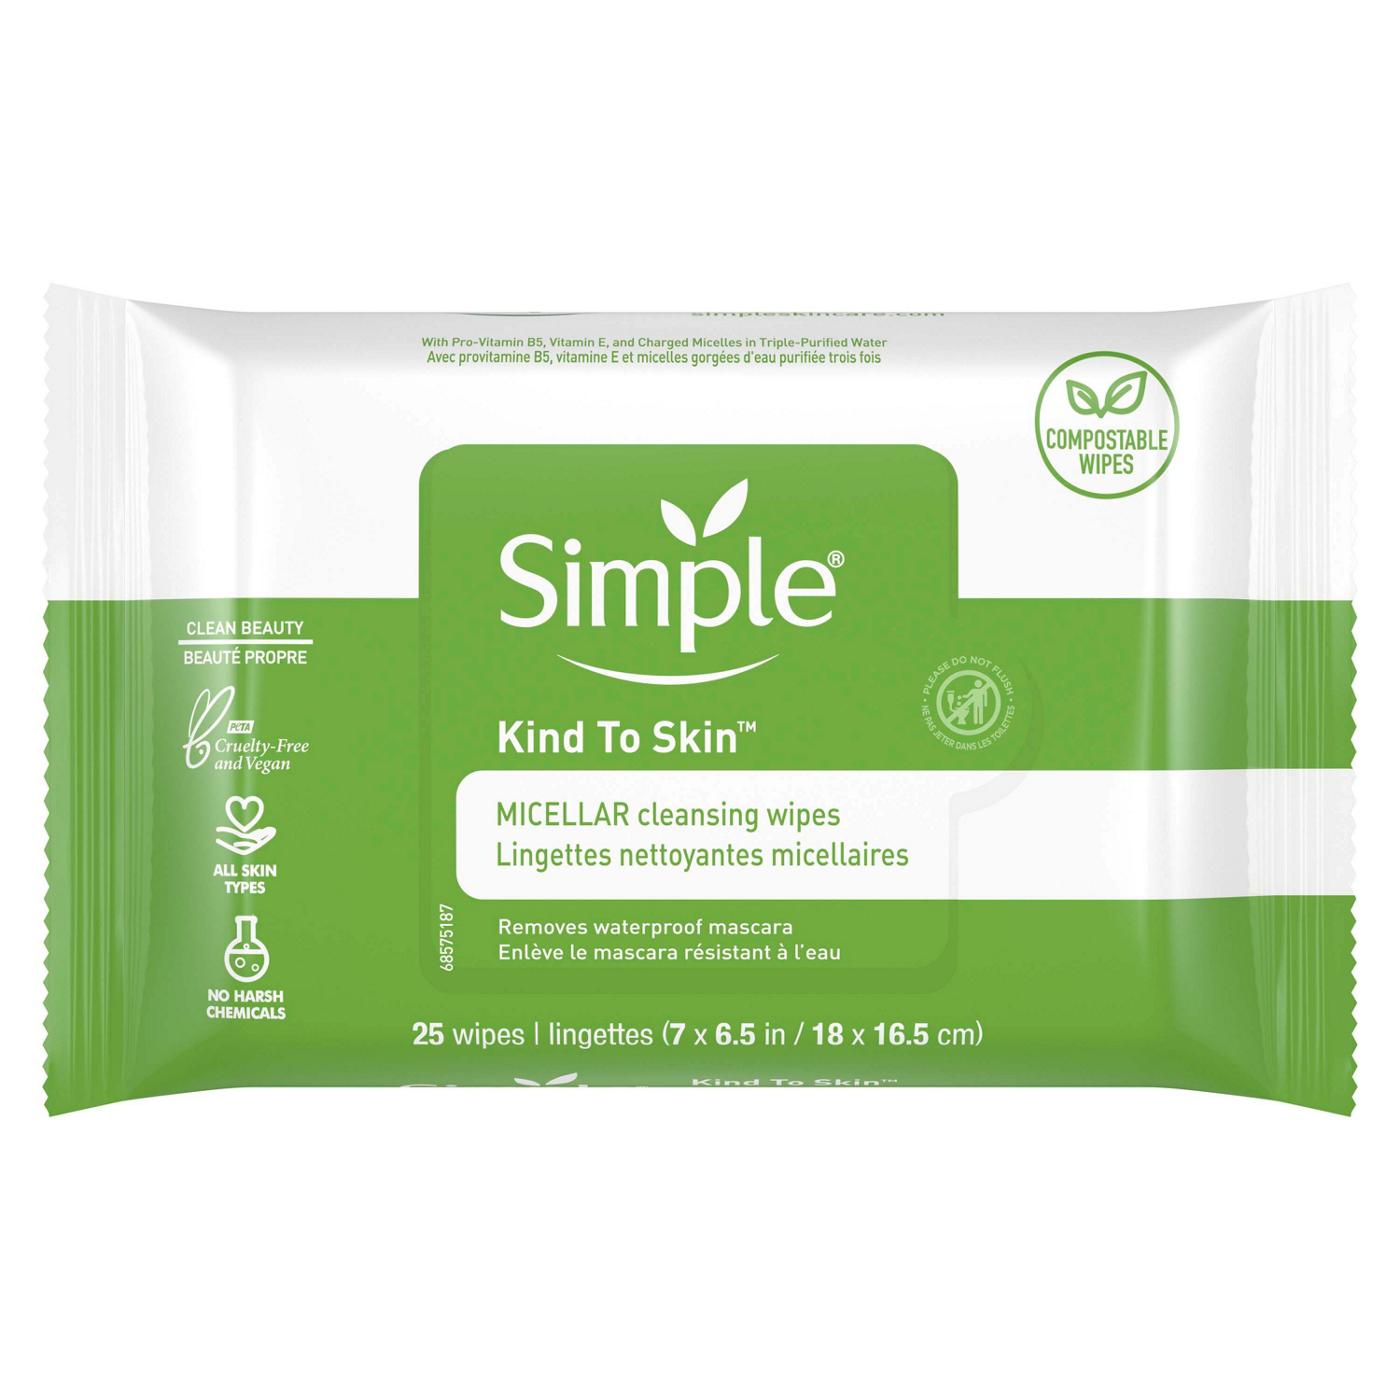 Simple Kind to Skin Micellar Cleansing Wipes; image 1 of 4